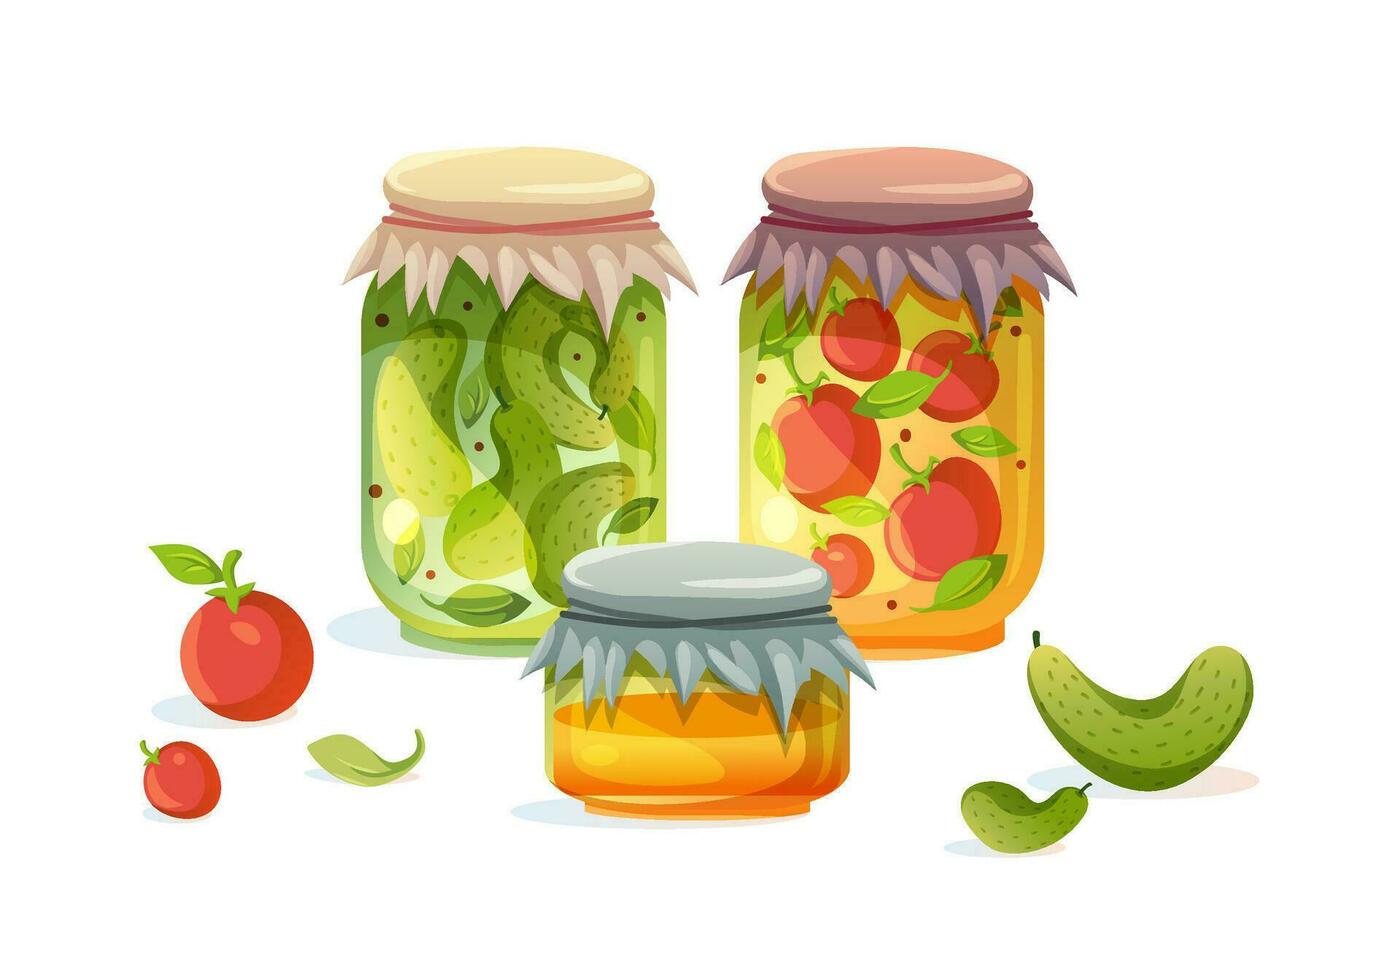 Glass jars with preserved food poster isolated on bright backdrop, vector illustration of canned vegetables, healthy meal set. Harvest.